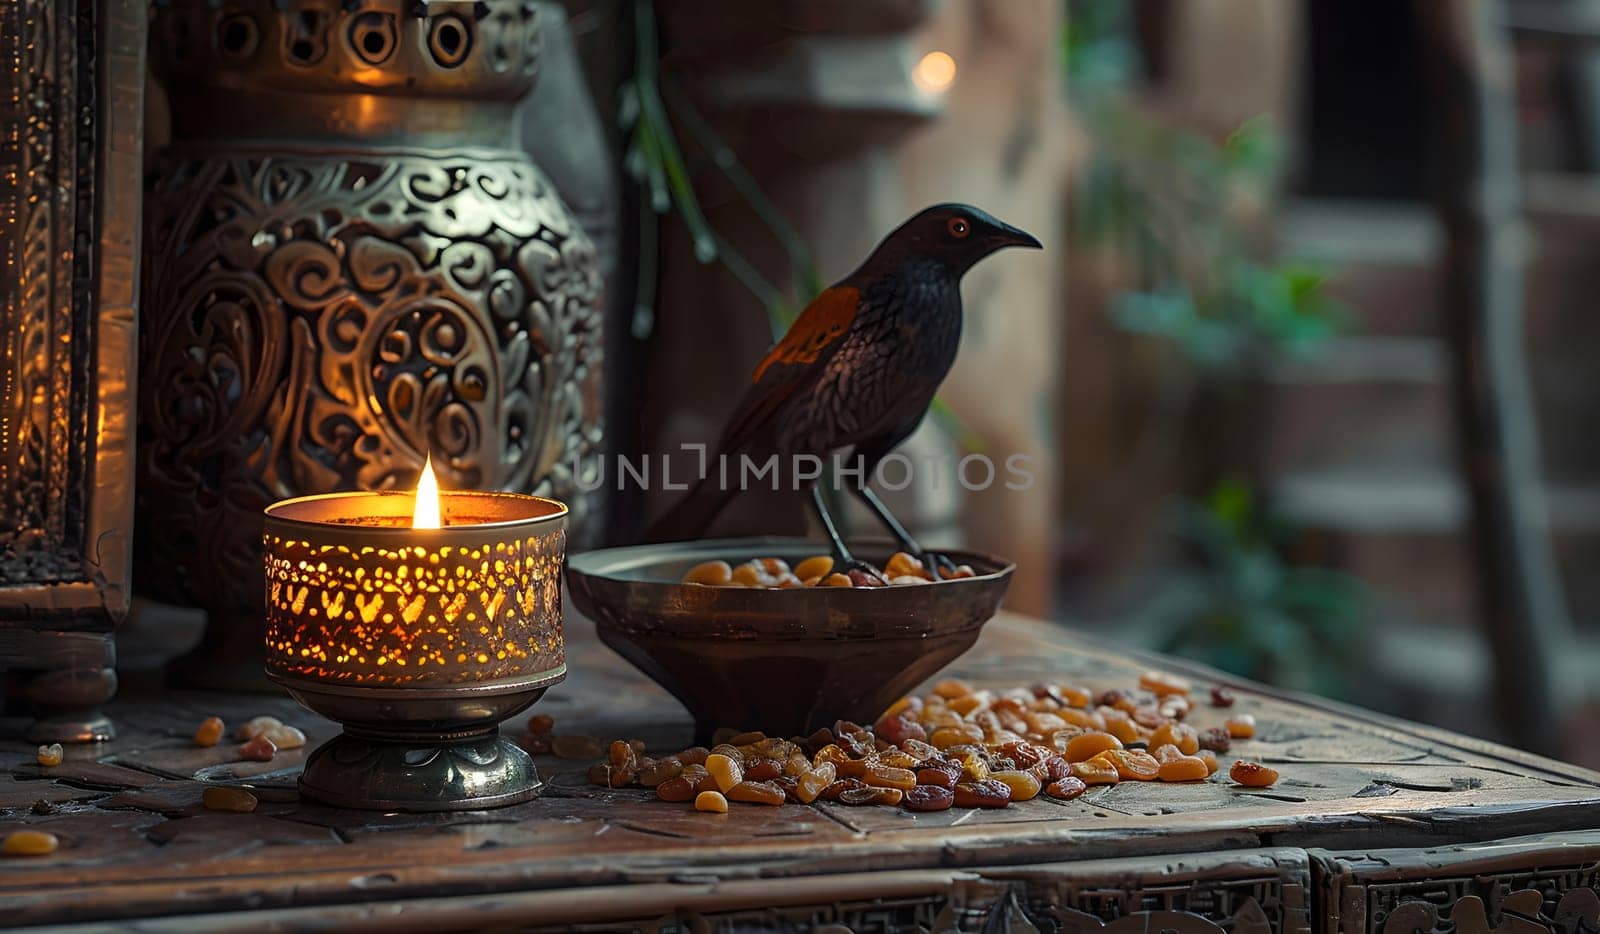 Songbird perched on table next to small animal food, candle, and glass by Nadtochiy